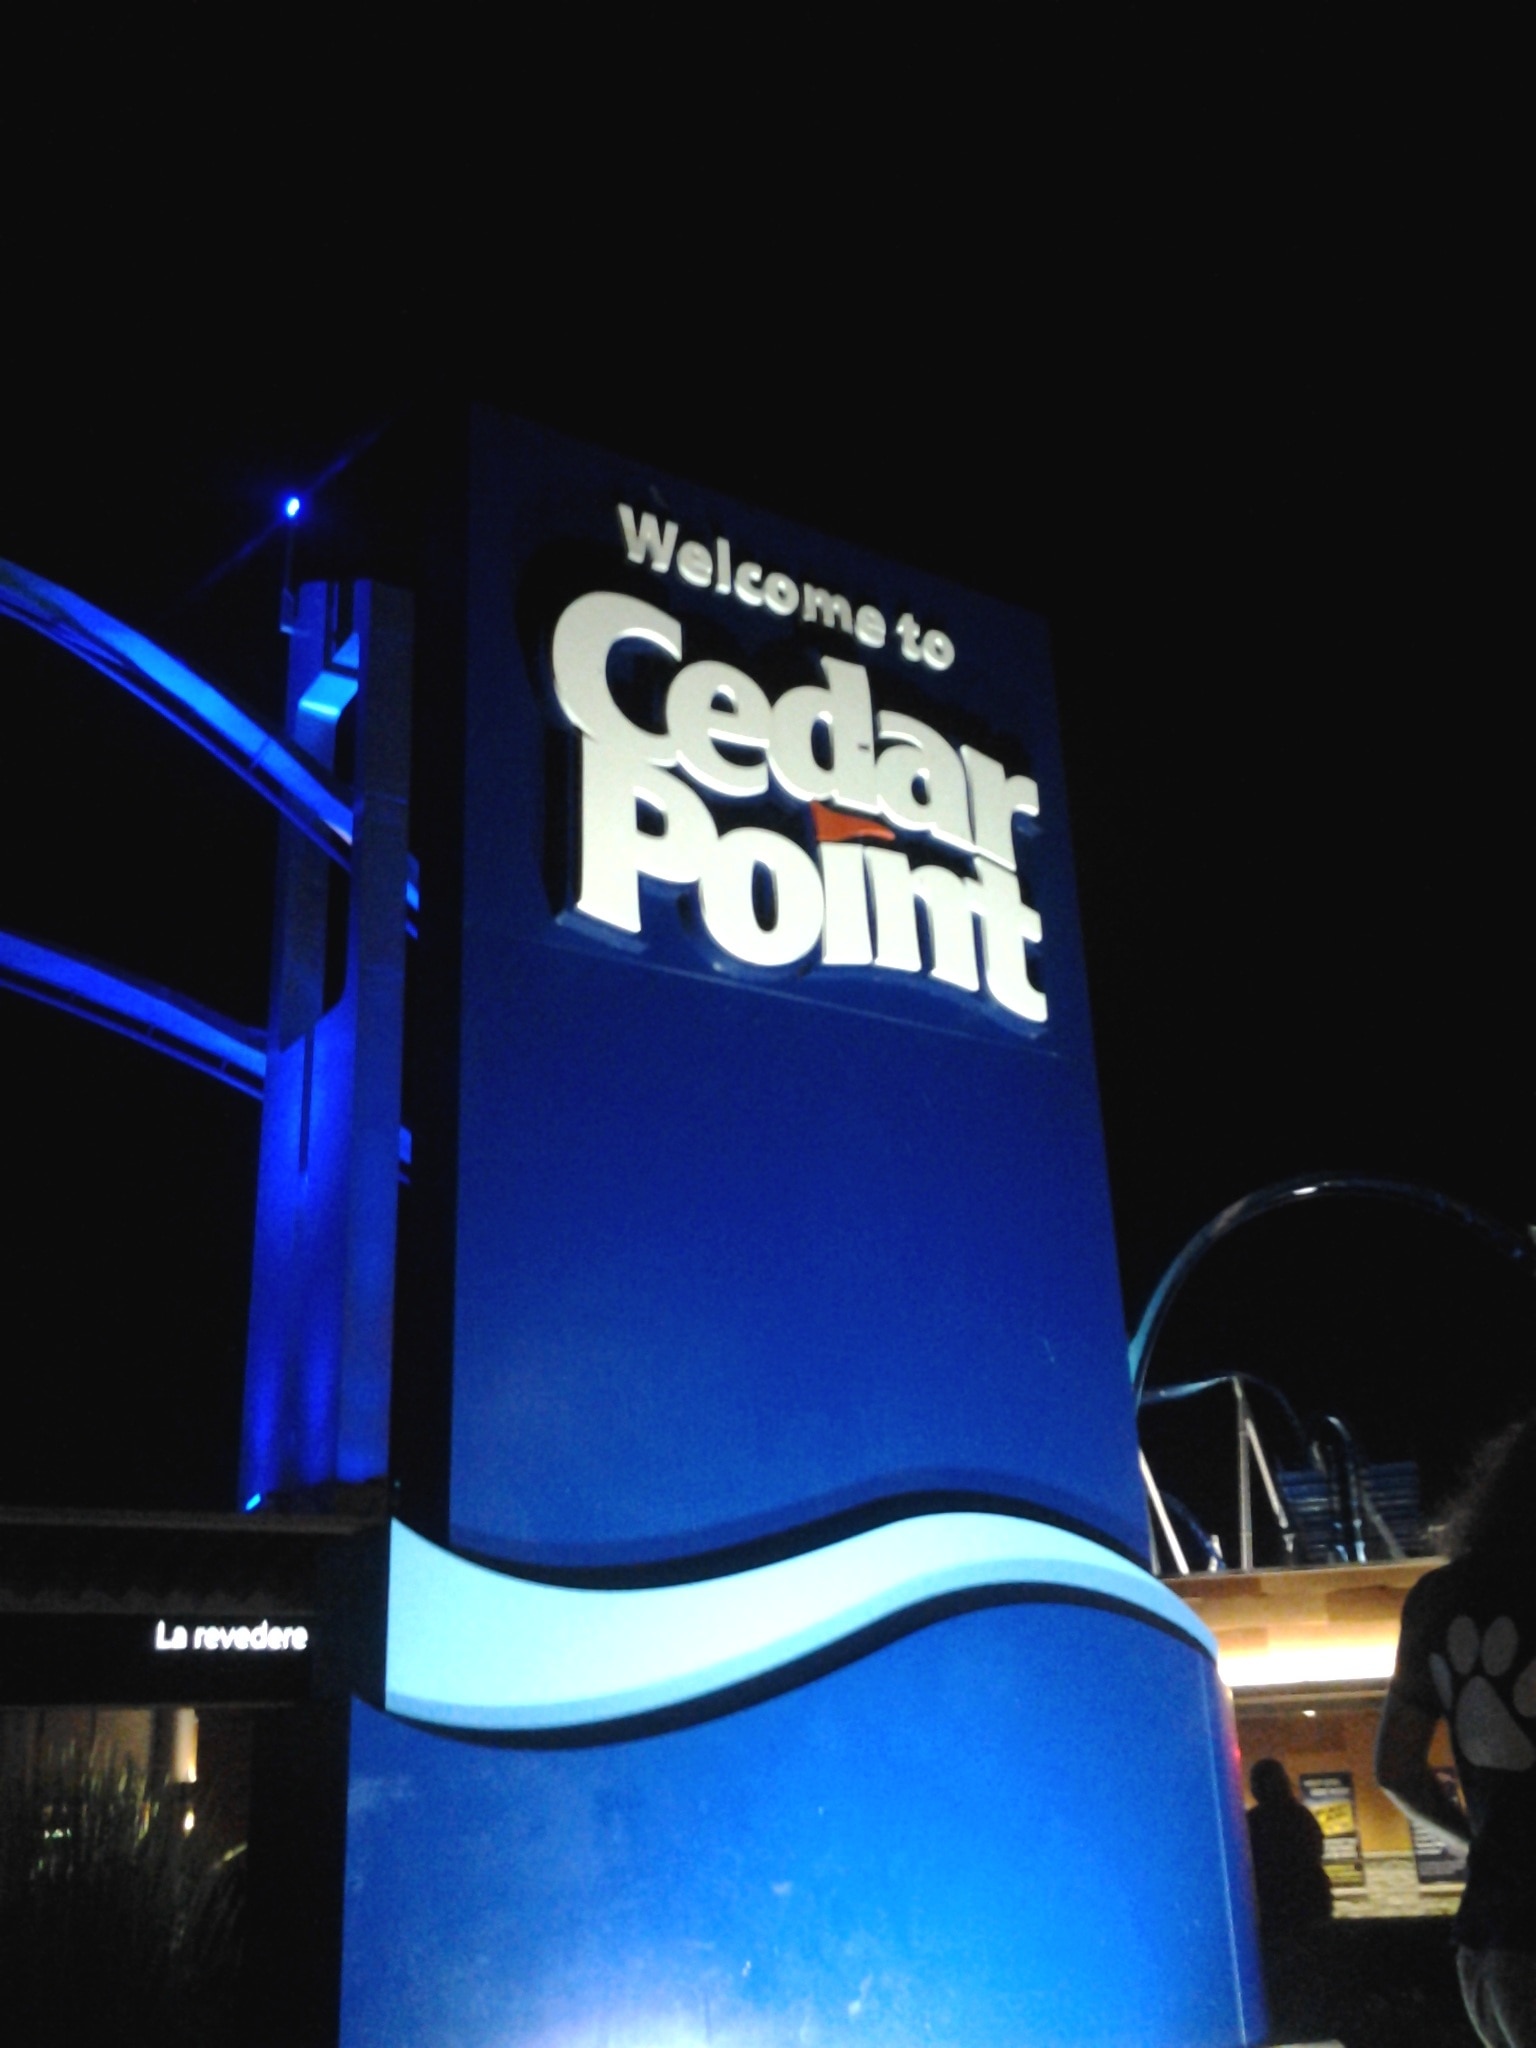 welcome to cedar point signage